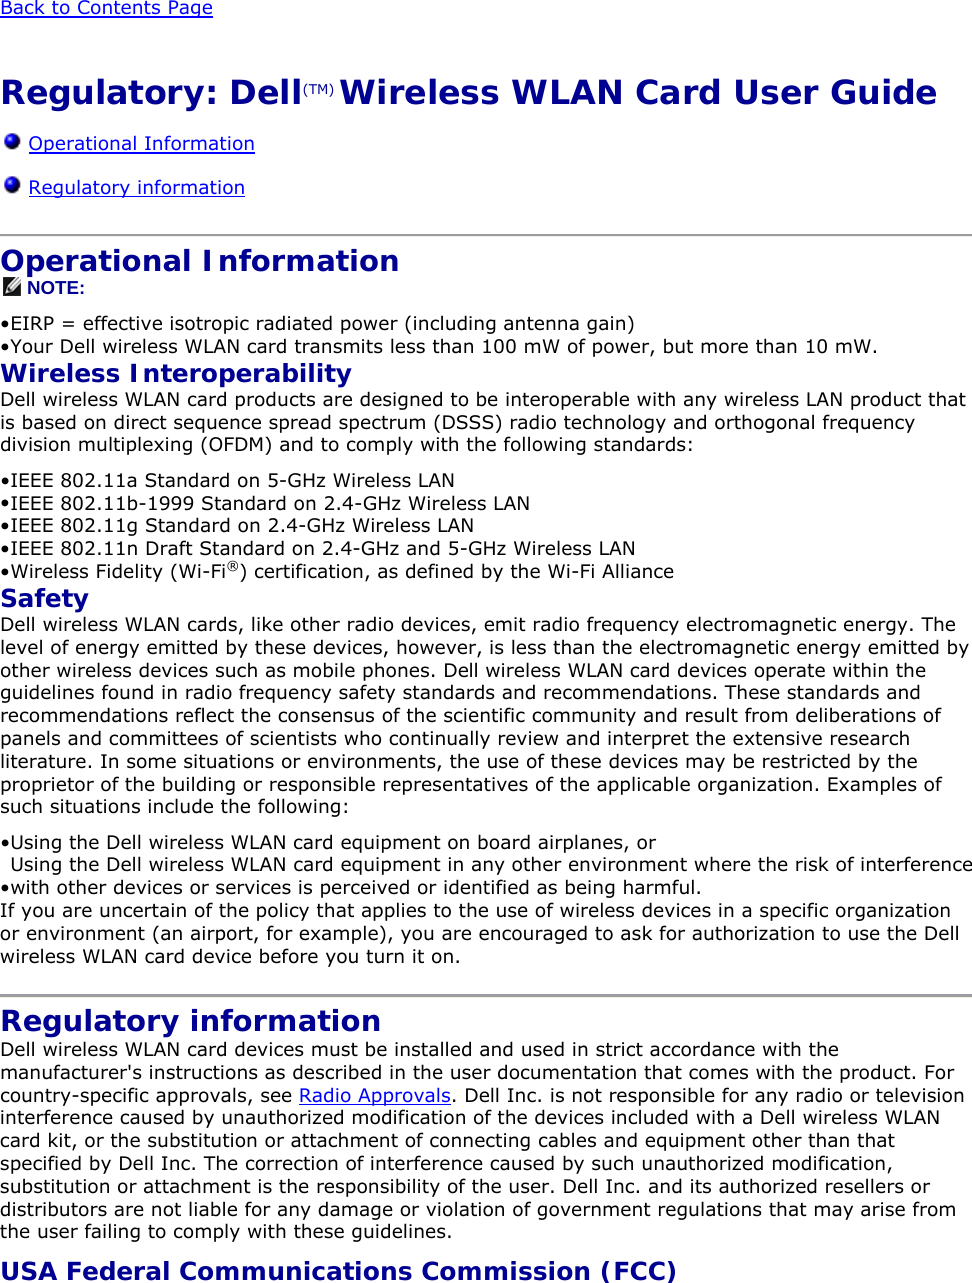  Back to Contents Page  Regulatory: Dell(TM) Wireless WLAN Card User Guide  Operational Information  Regulatory information  Operational Information  NOTE: • EIRP = effective isotropic radiated power (including antenna gain)  • Your Dell wireless WLAN card transmits less than 100 mW of power, but more than 10 mW. Wireless Interoperability Dell wireless WLAN card products are designed to be interoperable with any wireless LAN product that is based on direct sequence spread spectrum (DSSS) radio technology and orthogonal frequency division multiplexing (OFDM) and to comply with the following standards: • IEEE 802.11a Standard on 5-GHz Wireless LAN  • IEEE 802.11b-1999 Standard on 2.4-GHz Wireless LAN  • IEEE 802.11g Standard on 2.4-GHz Wireless LAN  • IEEE 802.11n Draft Standard on 2.4-GHz and 5-GHz Wireless LAN • Wireless Fidelity (Wi-Fi®) certification, as defined by the Wi-Fi Alliance  Safety Dell wireless WLAN cards, like other radio devices, emit radio frequency electromagnetic energy. The level of energy emitted by these devices, however, is less than the electromagnetic energy emitted by other wireless devices such as mobile phones. Dell wireless WLAN card devices operate within the guidelines found in radio frequency safety standards and recommendations. These standards and recommendations reflect the consensus of the scientific community and result from deliberations of panels and committees of scientists who continually review and interpret the extensive research literature. In some situations or environments, the use of these devices may be restricted by the proprietor of the building or responsible representatives of the applicable organization. Examples of such situations include the following: • Using the Dell wireless WLAN card equipment on board airplanes, or  • Using the Dell wireless WLAN card equipment in any other environment where the risk of interference with other devices or services is perceived or identified as being harmful.  If you are uncertain of the policy that applies to the use of wireless devices in a specific organization or environment (an airport, for example), you are encouraged to ask for authorization to use the Dell wireless WLAN card device before you turn it on.  Regulatory information Dell wireless WLAN card devices must be installed and used in strict accordance with the manufacturer&apos;s instructions as described in the user documentation that comes with the product. For country-specific approvals, see Radio Approvals. Dell Inc. is not responsible for any radio or television interference caused by unauthorized modification of the devices included with a Dell wireless WLAN card kit, or the substitution or attachment of connecting cables and equipment other than that specified by Dell Inc. The correction of interference caused by such unauthorized modification, substitution or attachment is the responsibility of the user. Dell Inc. and its authorized resellers or distributors are not liable for any damage or violation of government regulations that may arise from the user failing to comply with these guidelines. USA Federal Communications Commission (FCC) 